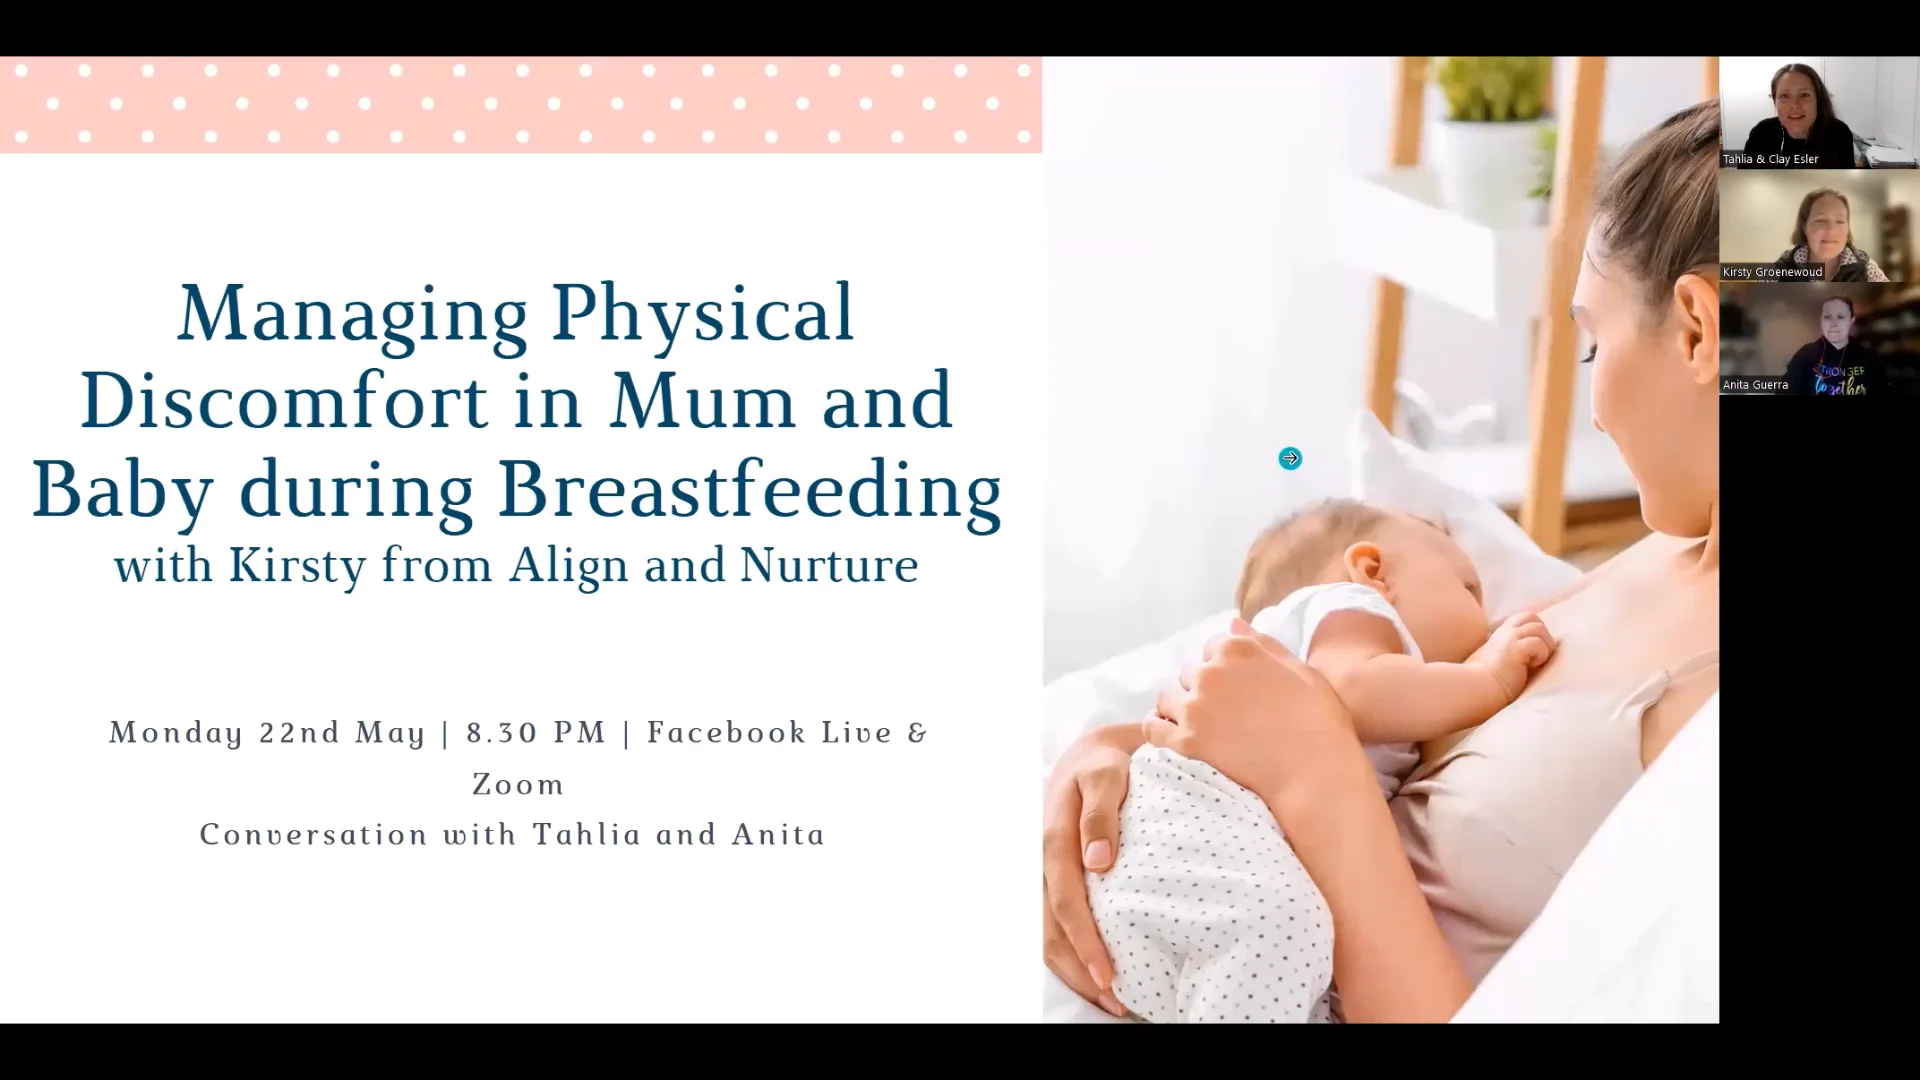 Managing Physical Discomfort in Mum and Baby During Breastfeeding on Vimeo